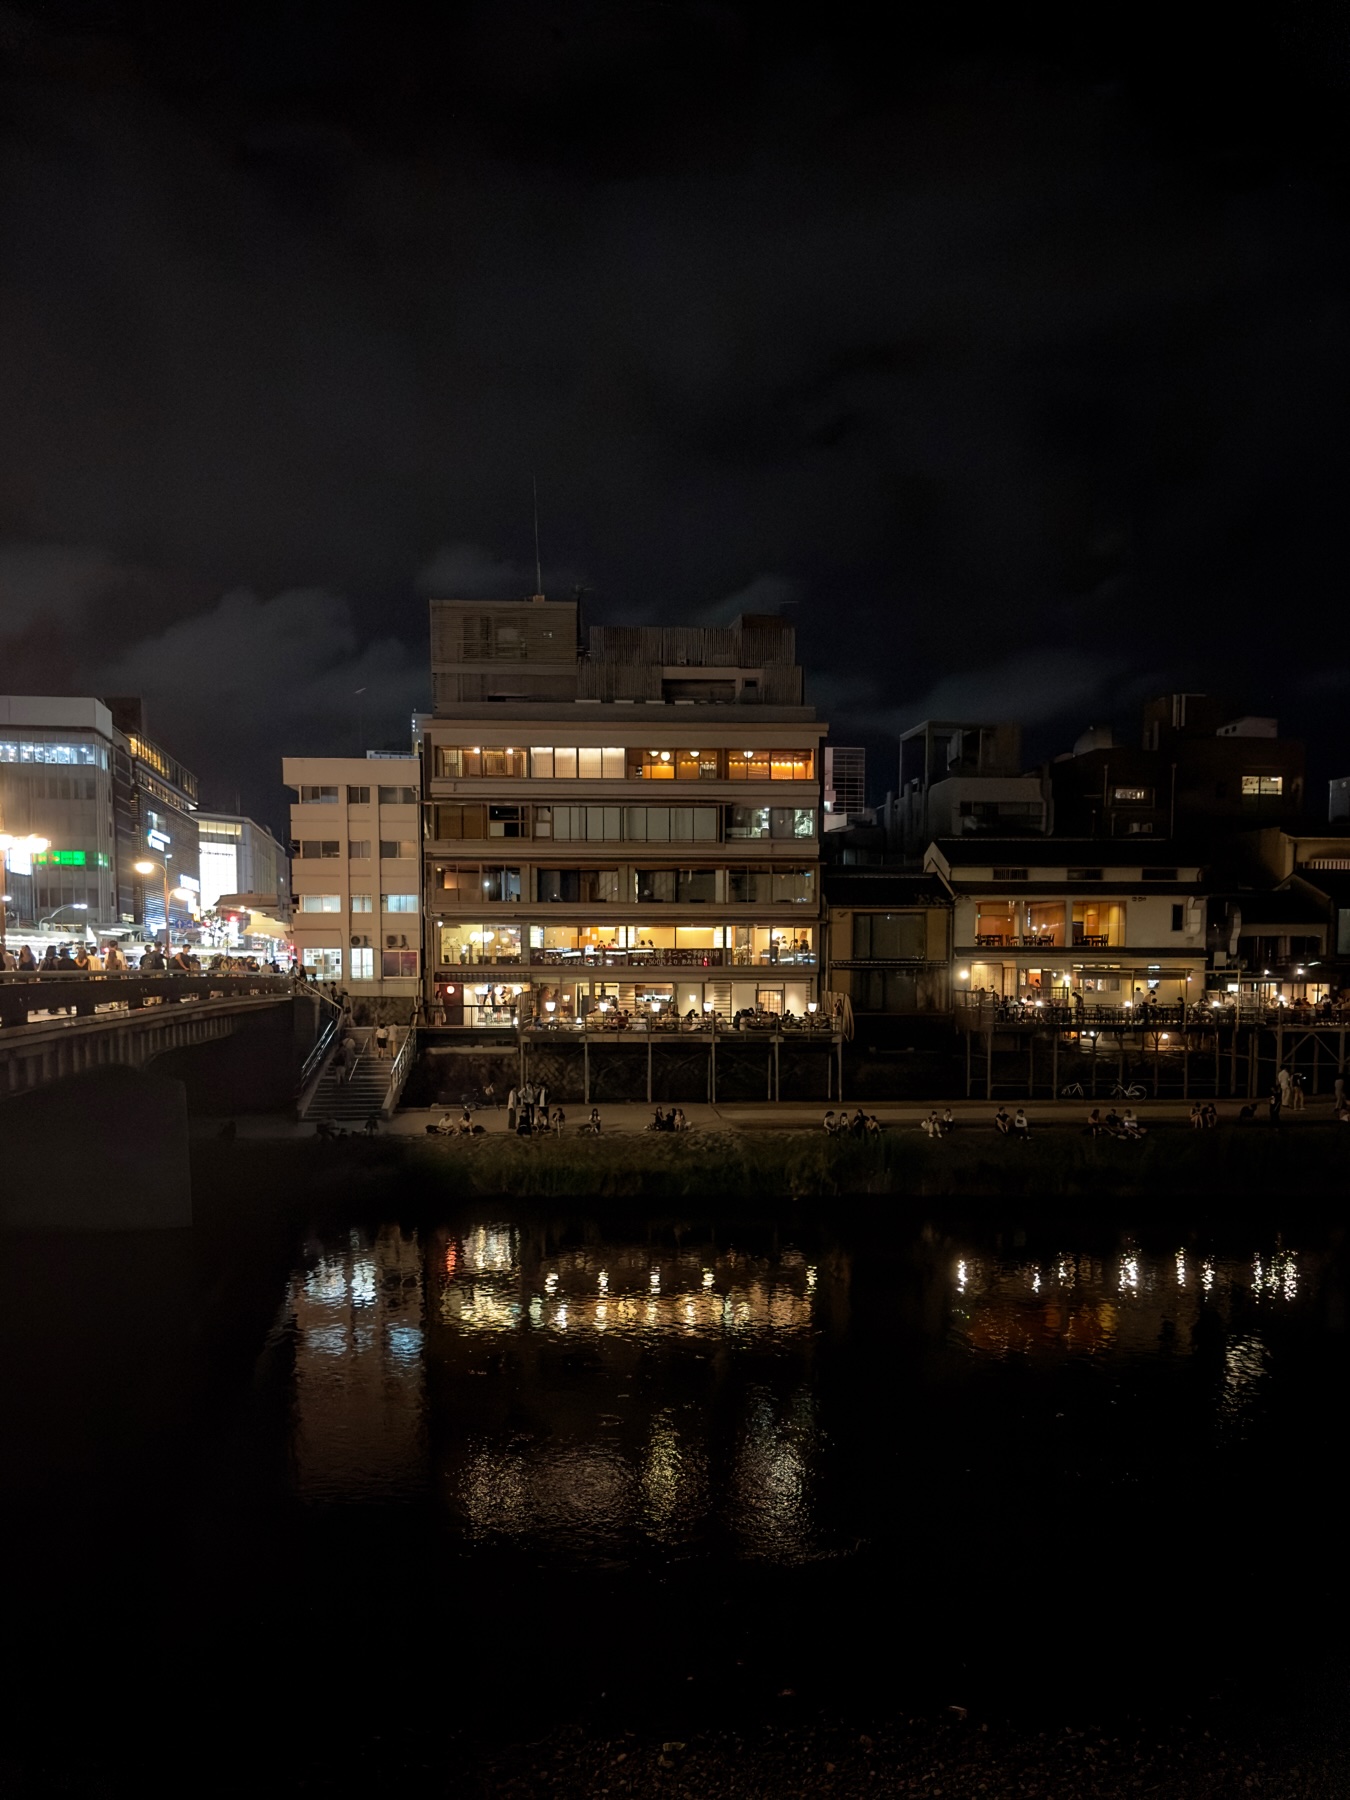 A row of riverside restaurants at night. The glow of the windows lighting and reflecting the water